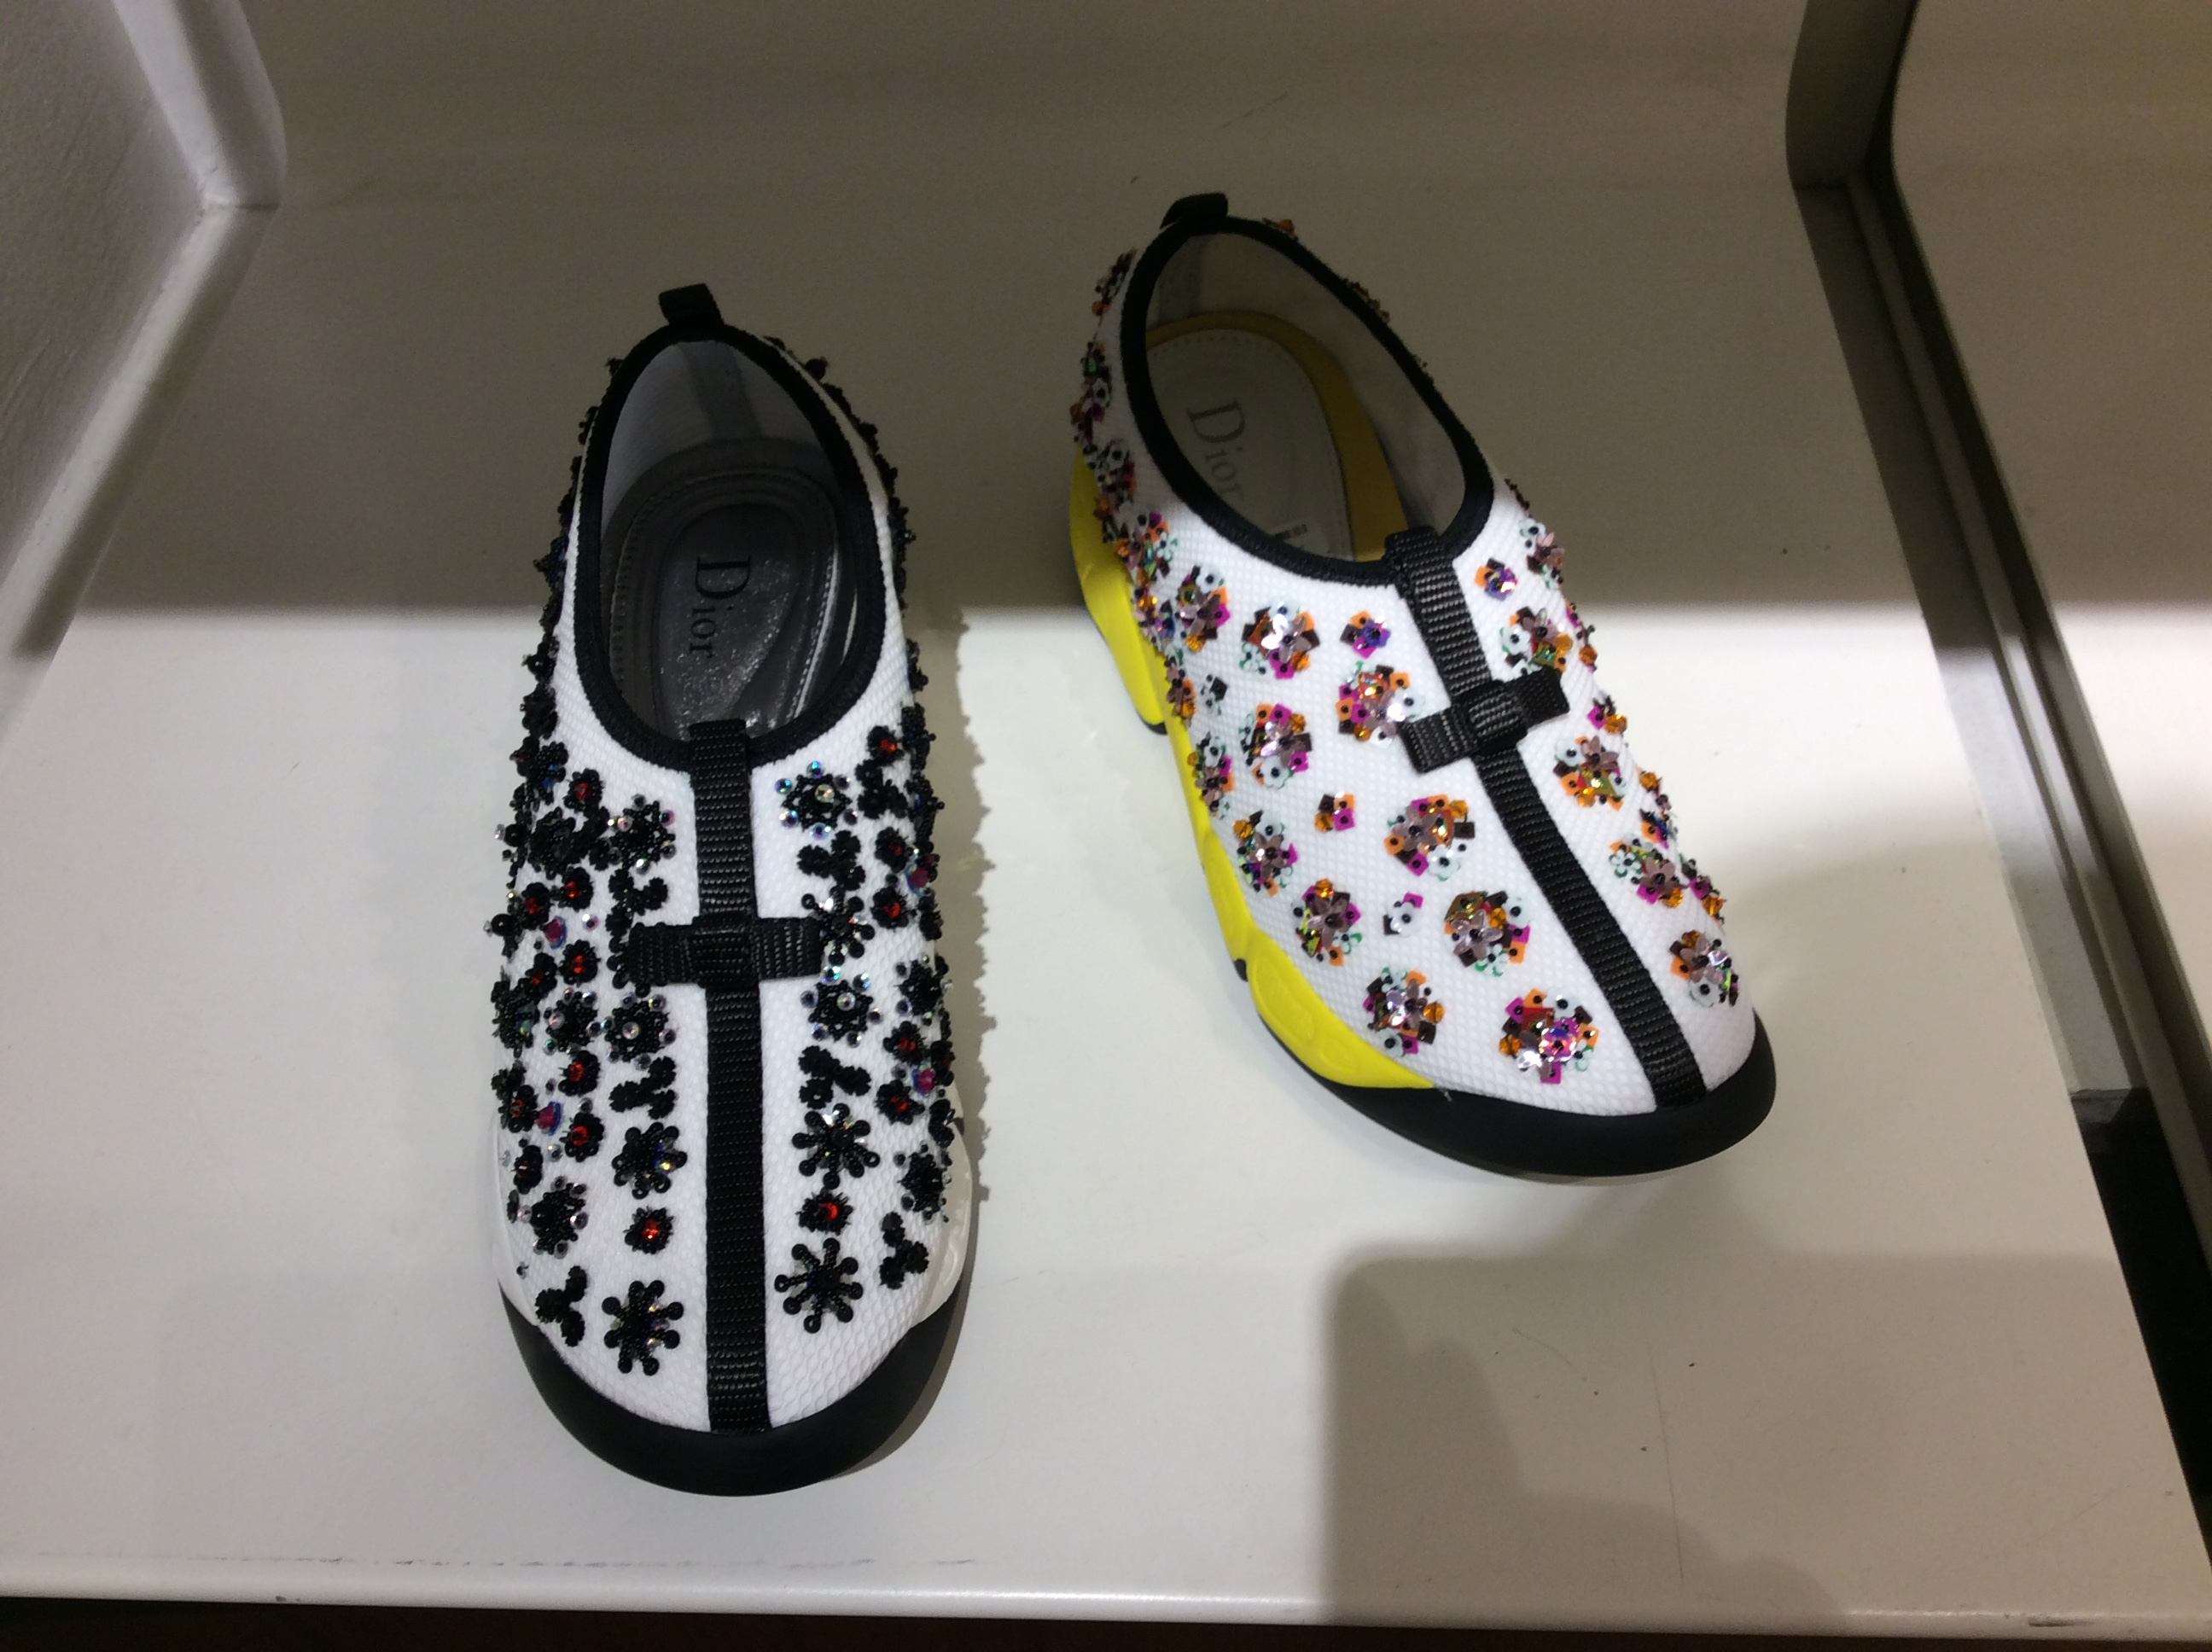 Christian Dior Shoes & Bags  In-Store Trends at Bloomingdale's